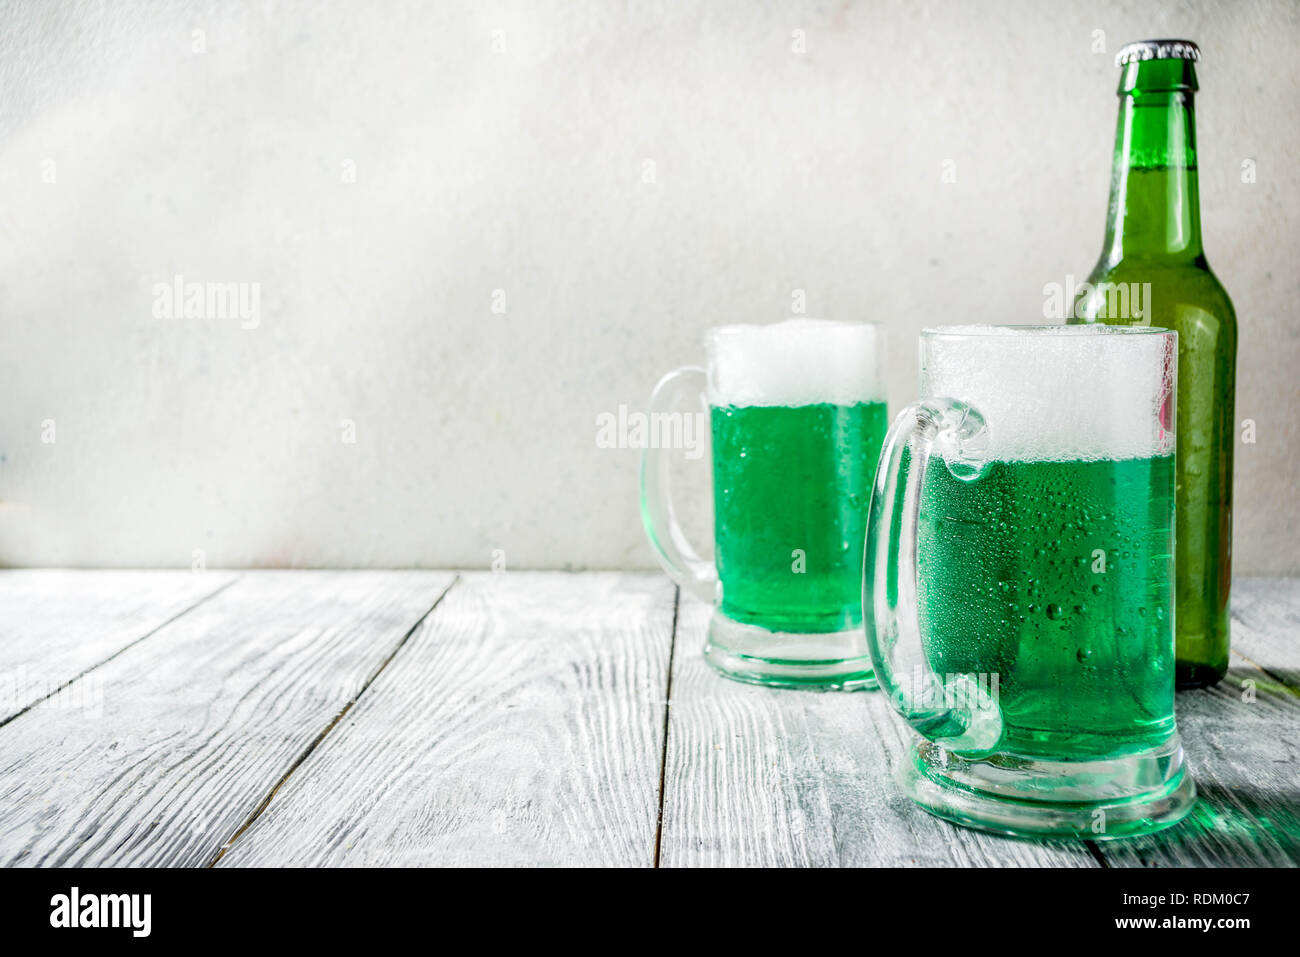 https://c8.alamy.com/comp/RDM0C7/st-patricks-day-concept-two-glasses-and-bottle-with-cold-fresh-cold-green-beer-on-wooden-table-bar-counter-background-for-st-patricks-day-and-ok-RDM0C7.jpg